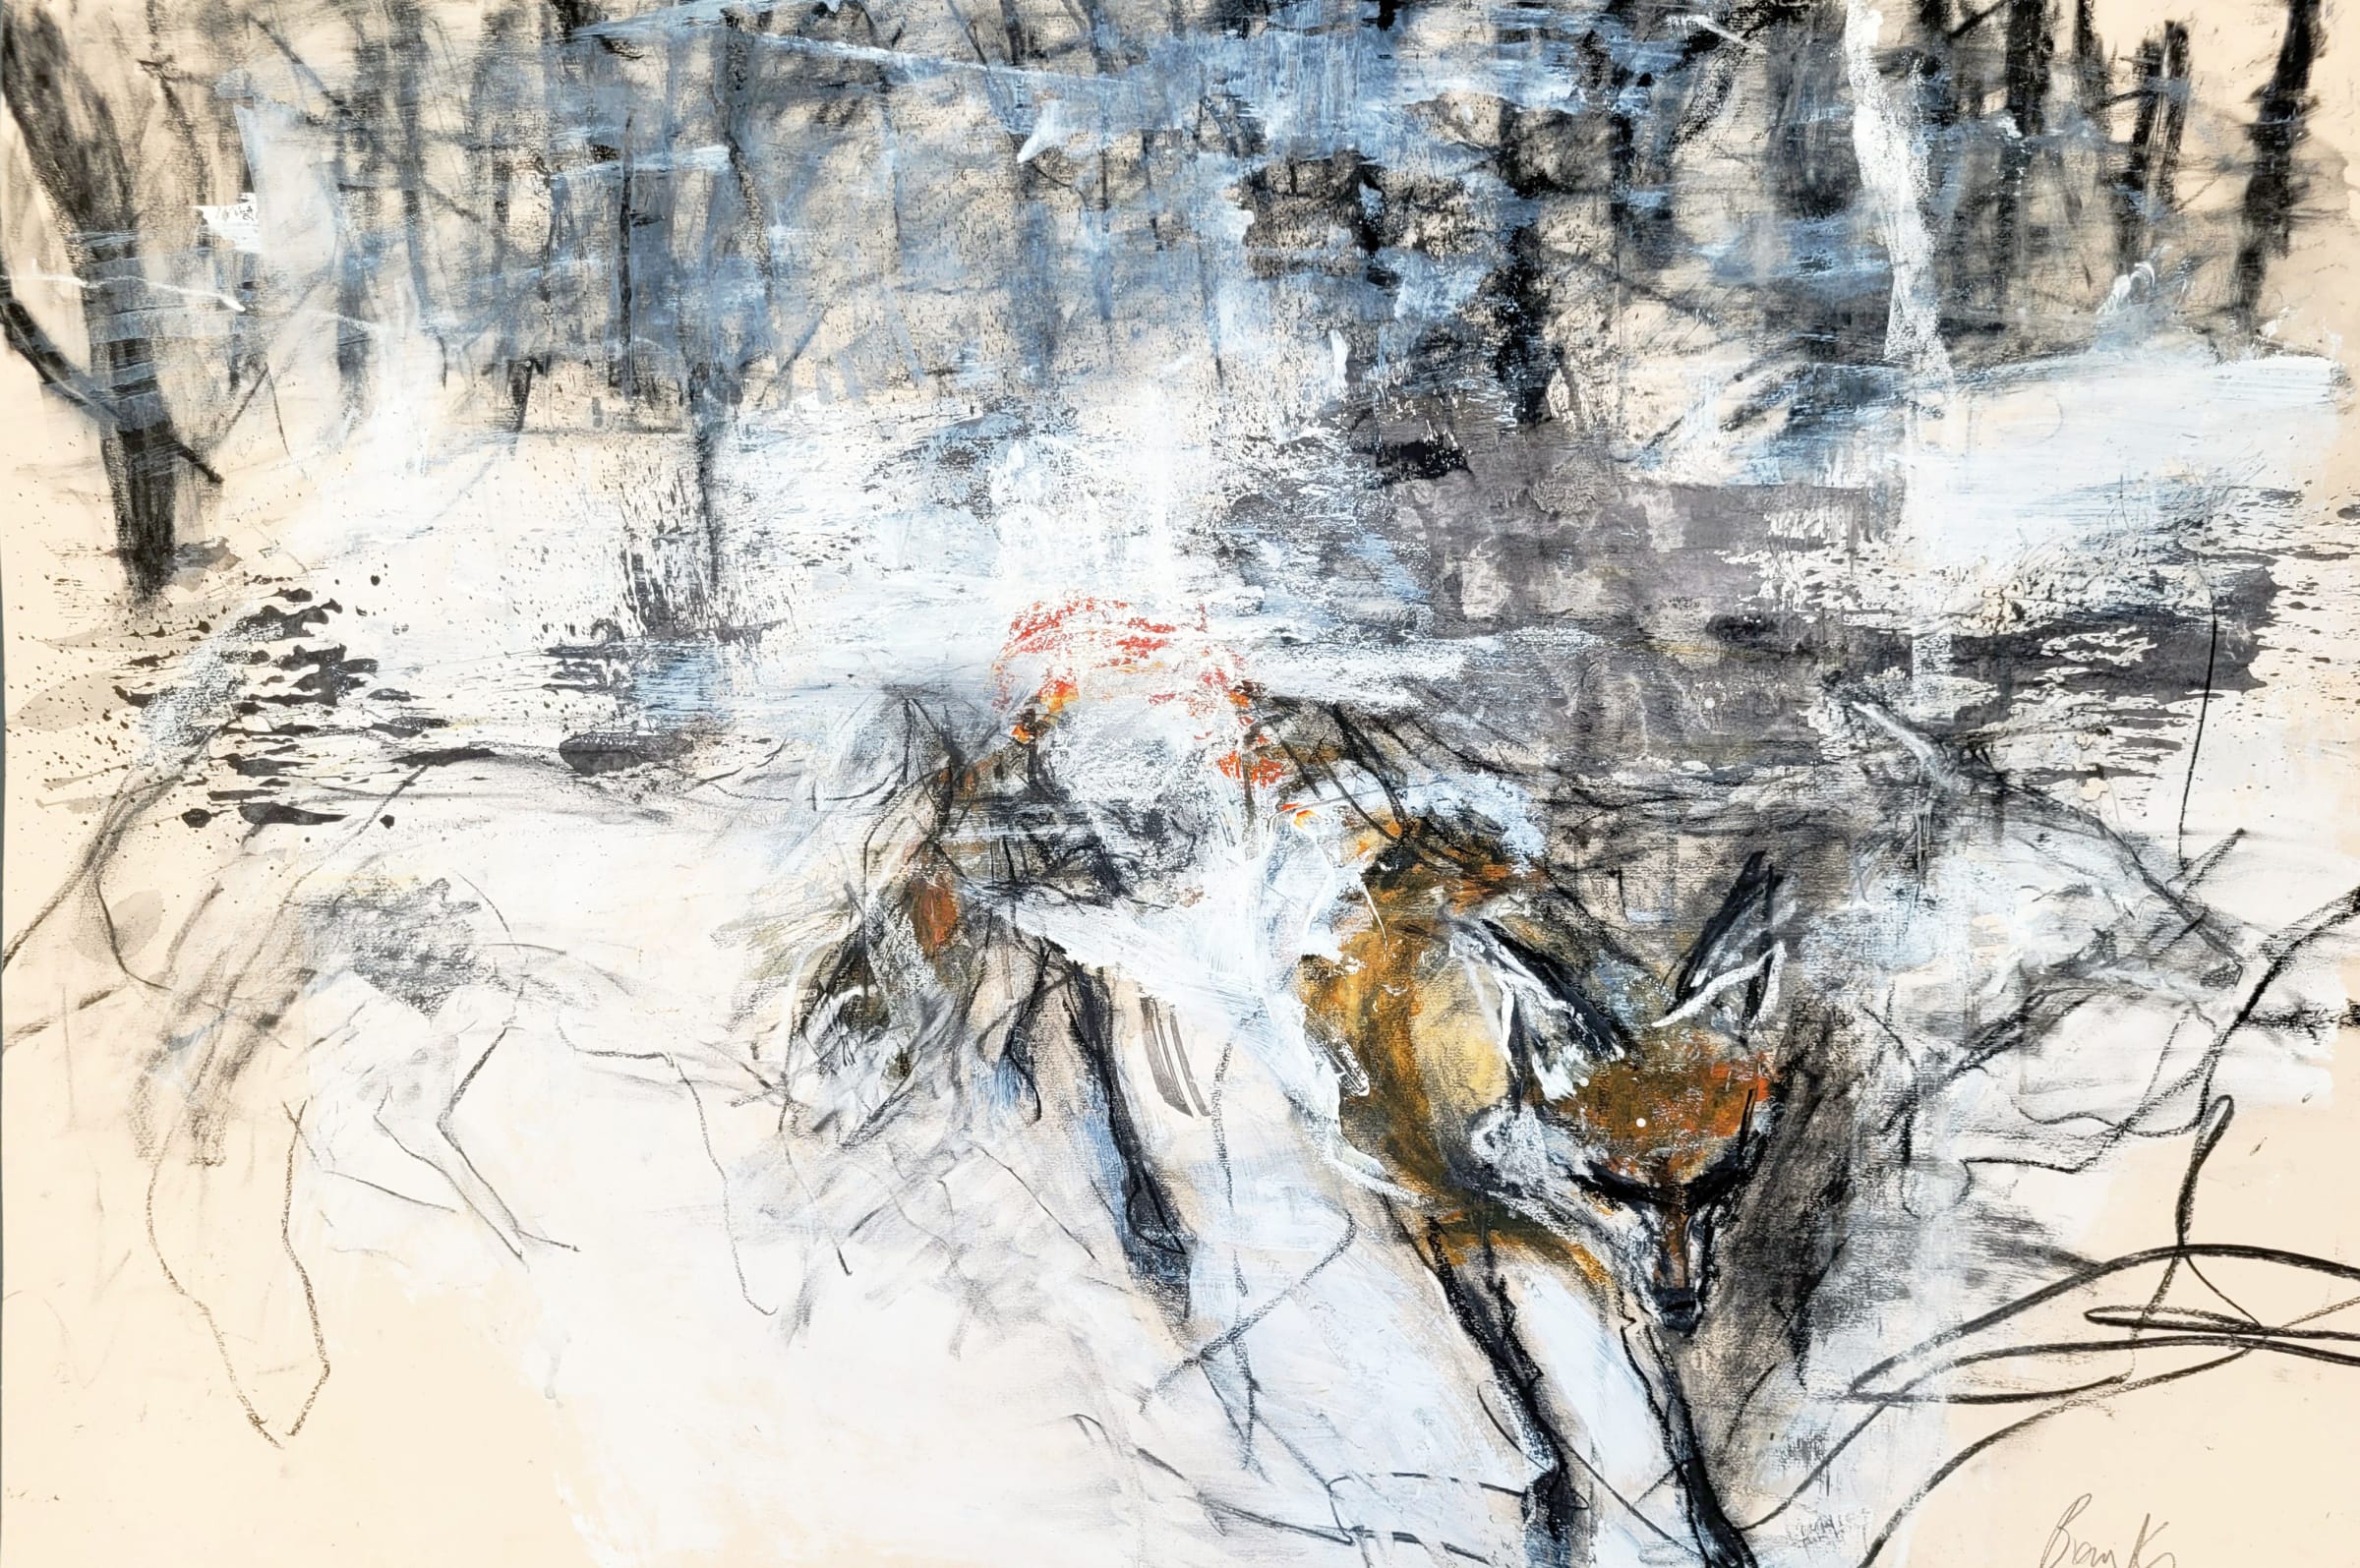 Margo Banks: Eternity is a possibility, 70 x 100cm, mixed media on paper | Margo Banks: Crow Voice, Fox Voice … Wolf Voice | Thursday 29 June – Saturday 22 July 2023 | Solomon Fine Art | Image: Margo Banks: Eternity is a possibility, 70 x 100cm, mixed media on paper – very dynamic, somewhat palimpsest-like sketch of a fox with charcoal depiction of a forest in the background, all against a cream-coloured background 